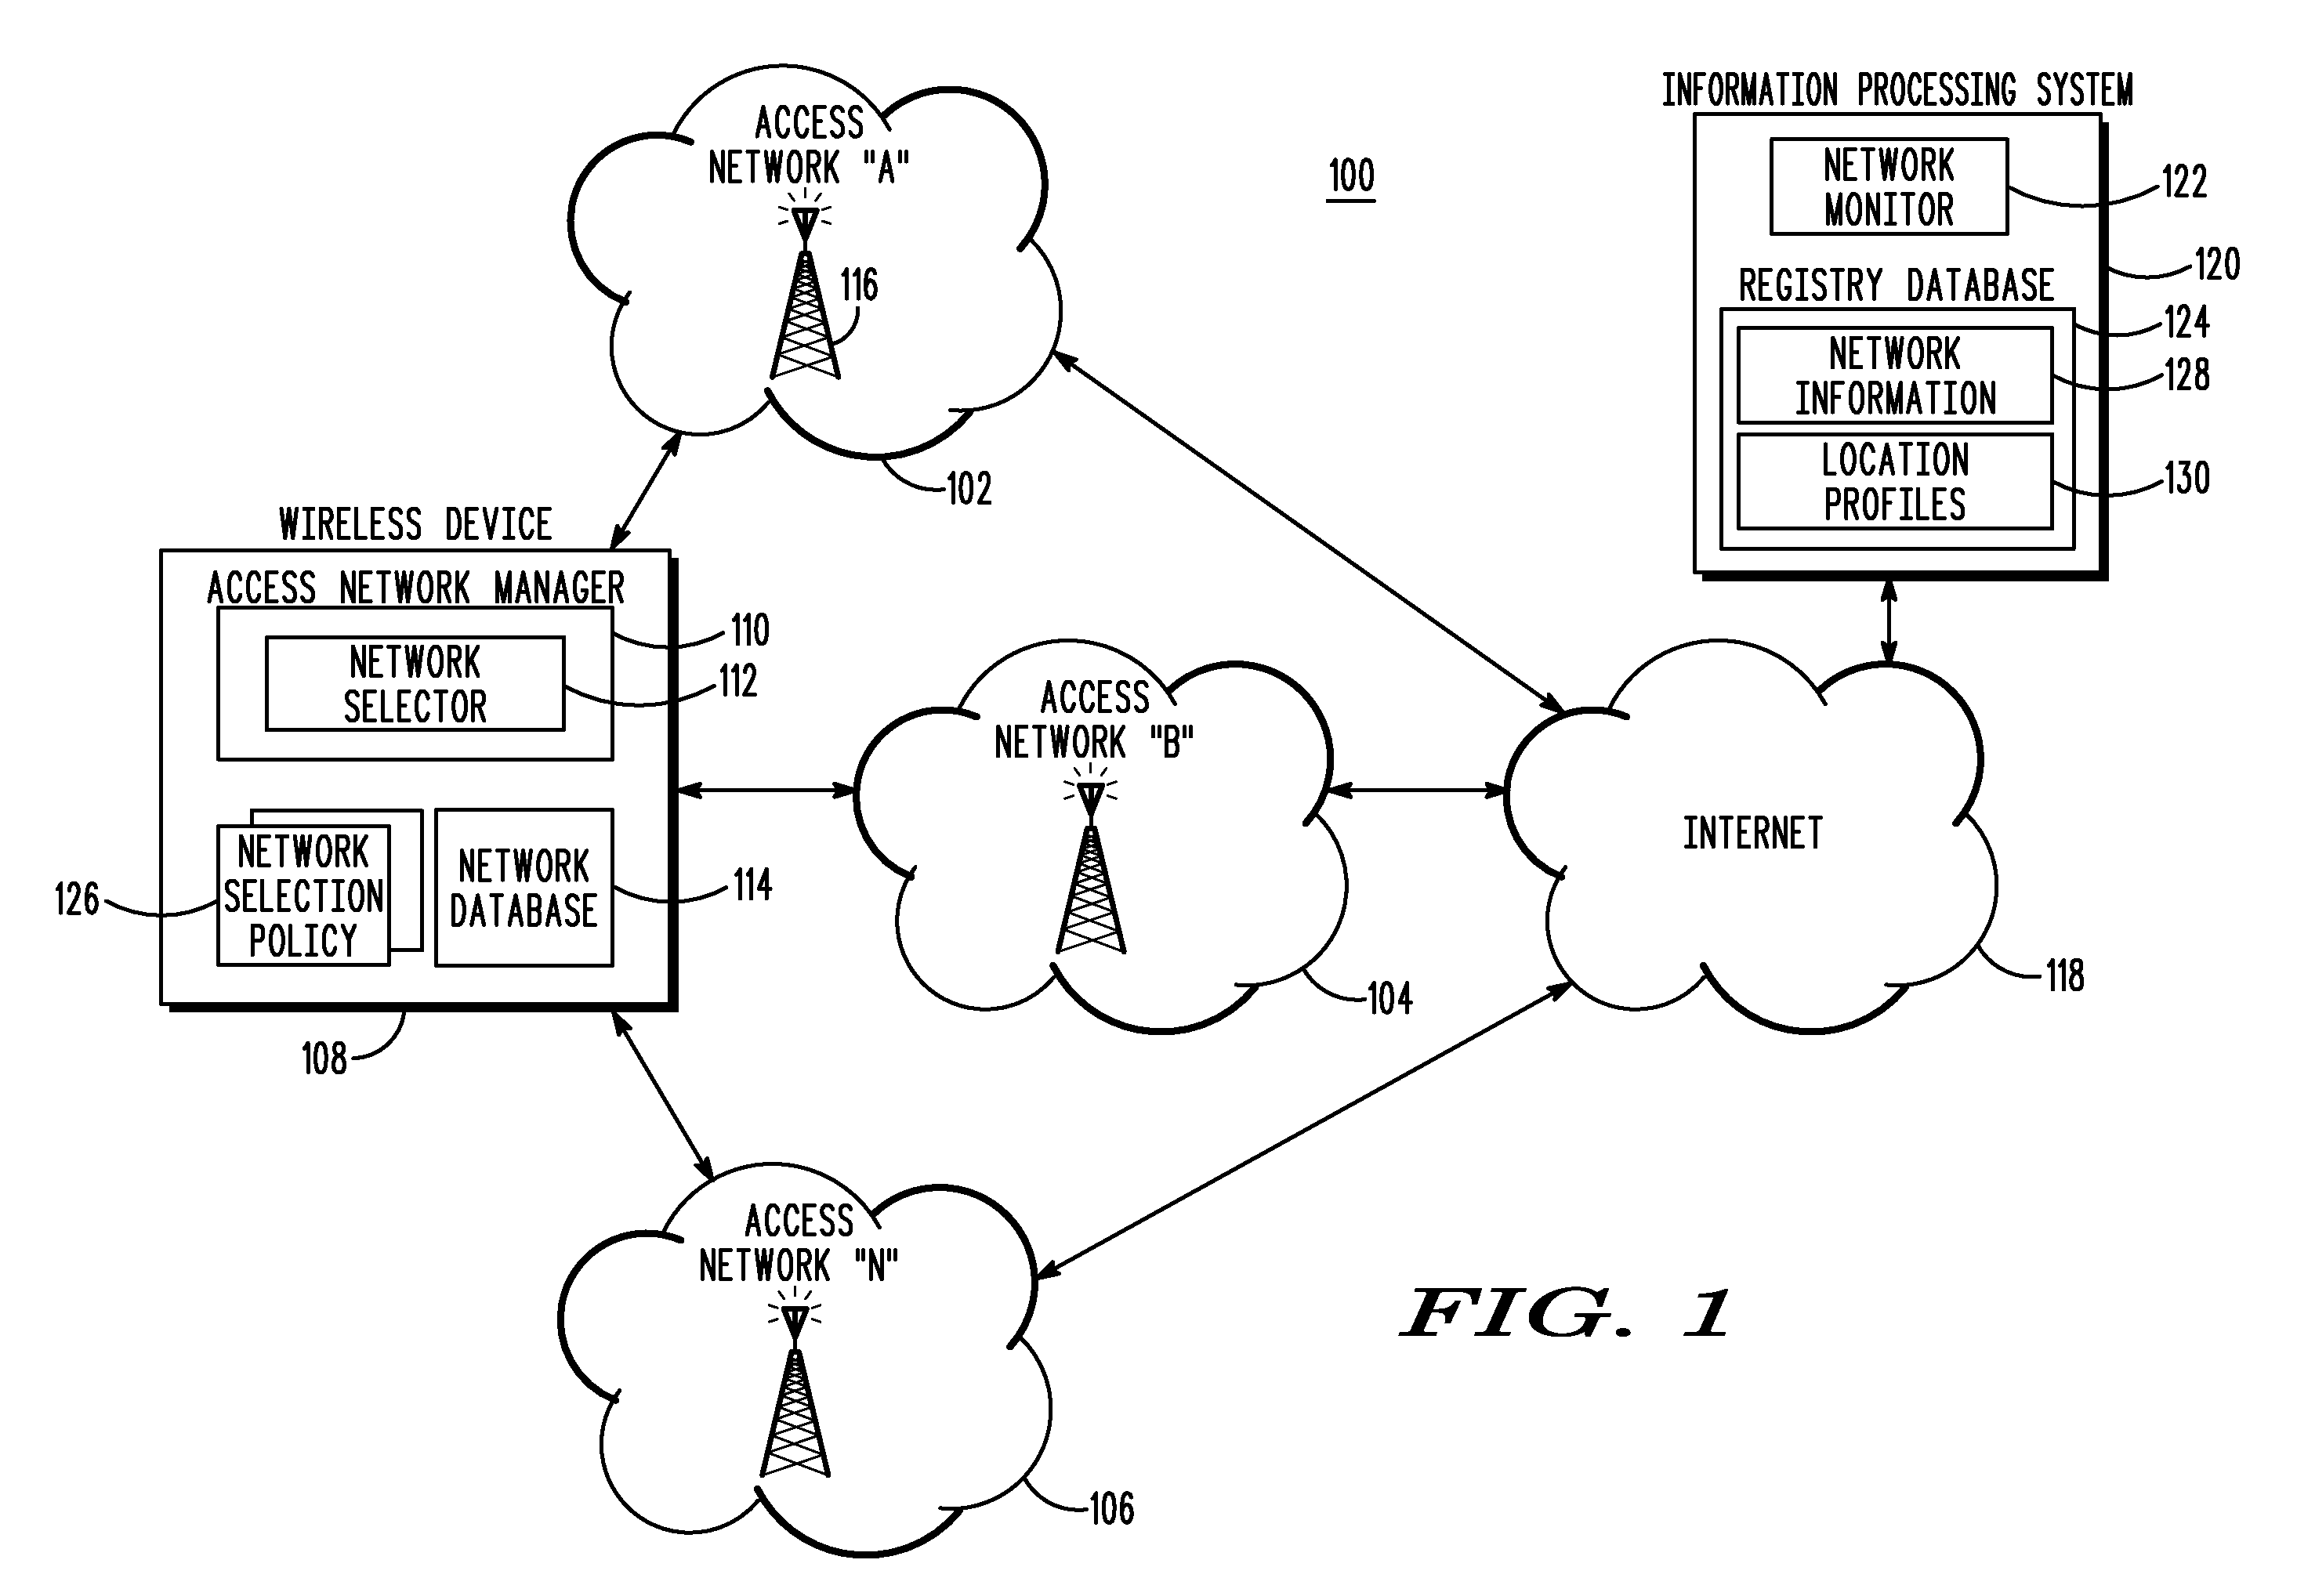 Dynamic network selection by a wireless device